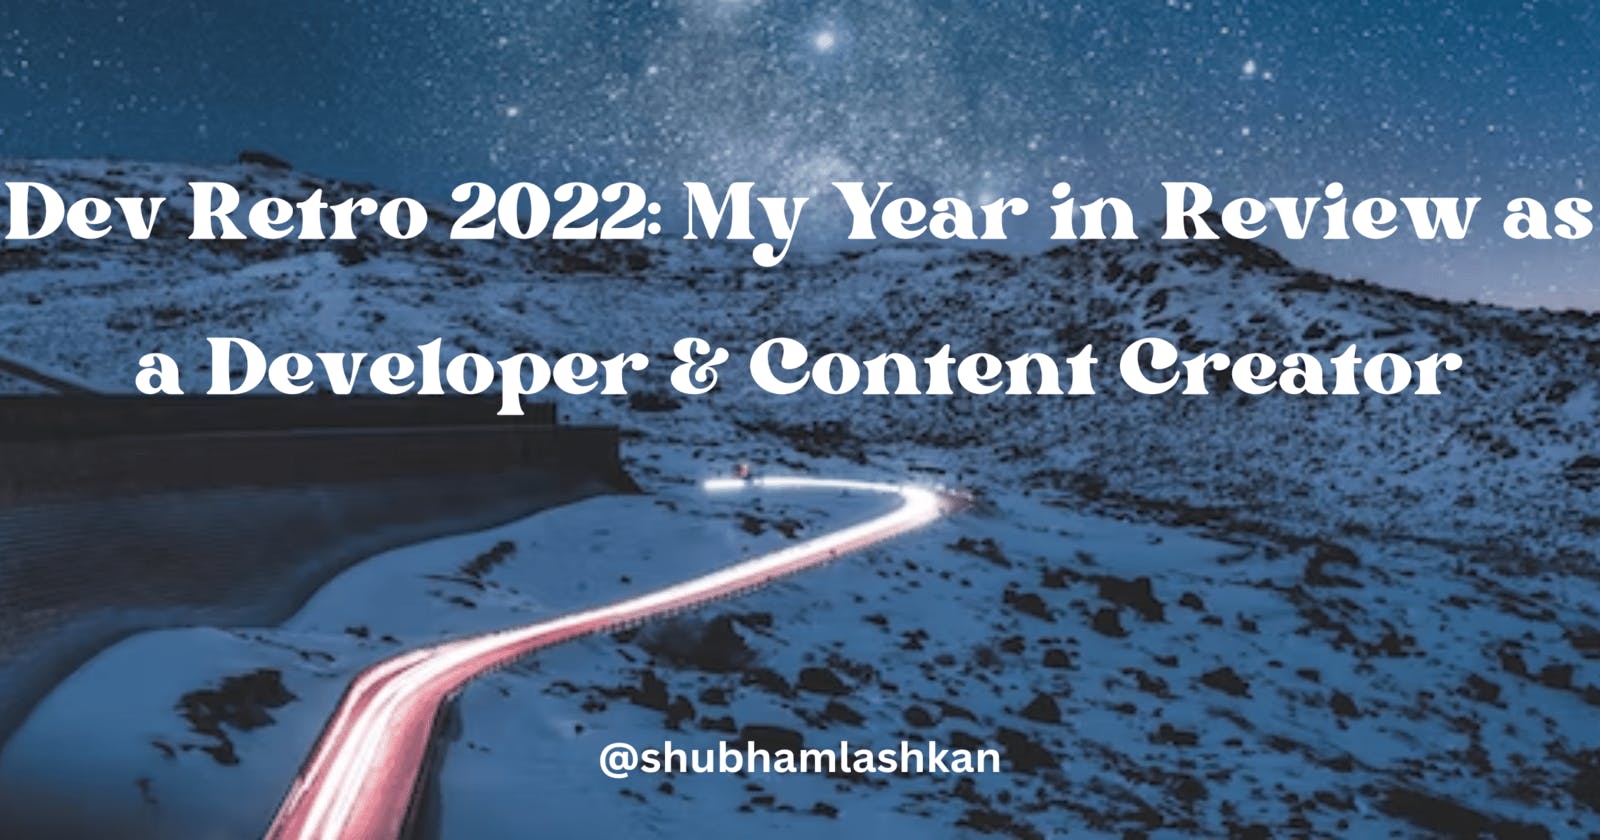 Dev Retro 2022: My Year in Review as a Developer & Content Creator